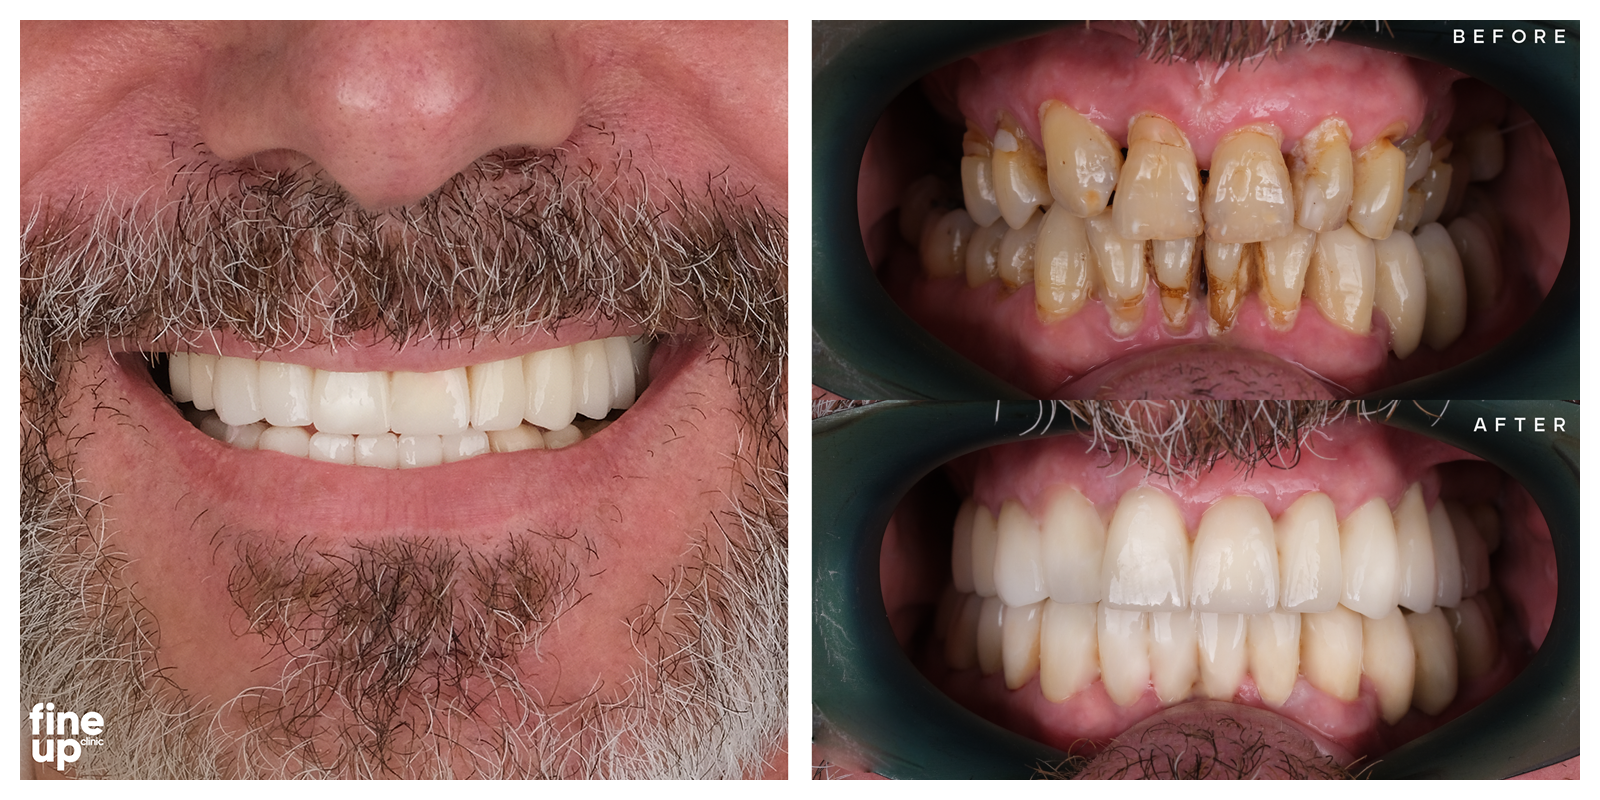 Male bearded man with a smile makeover